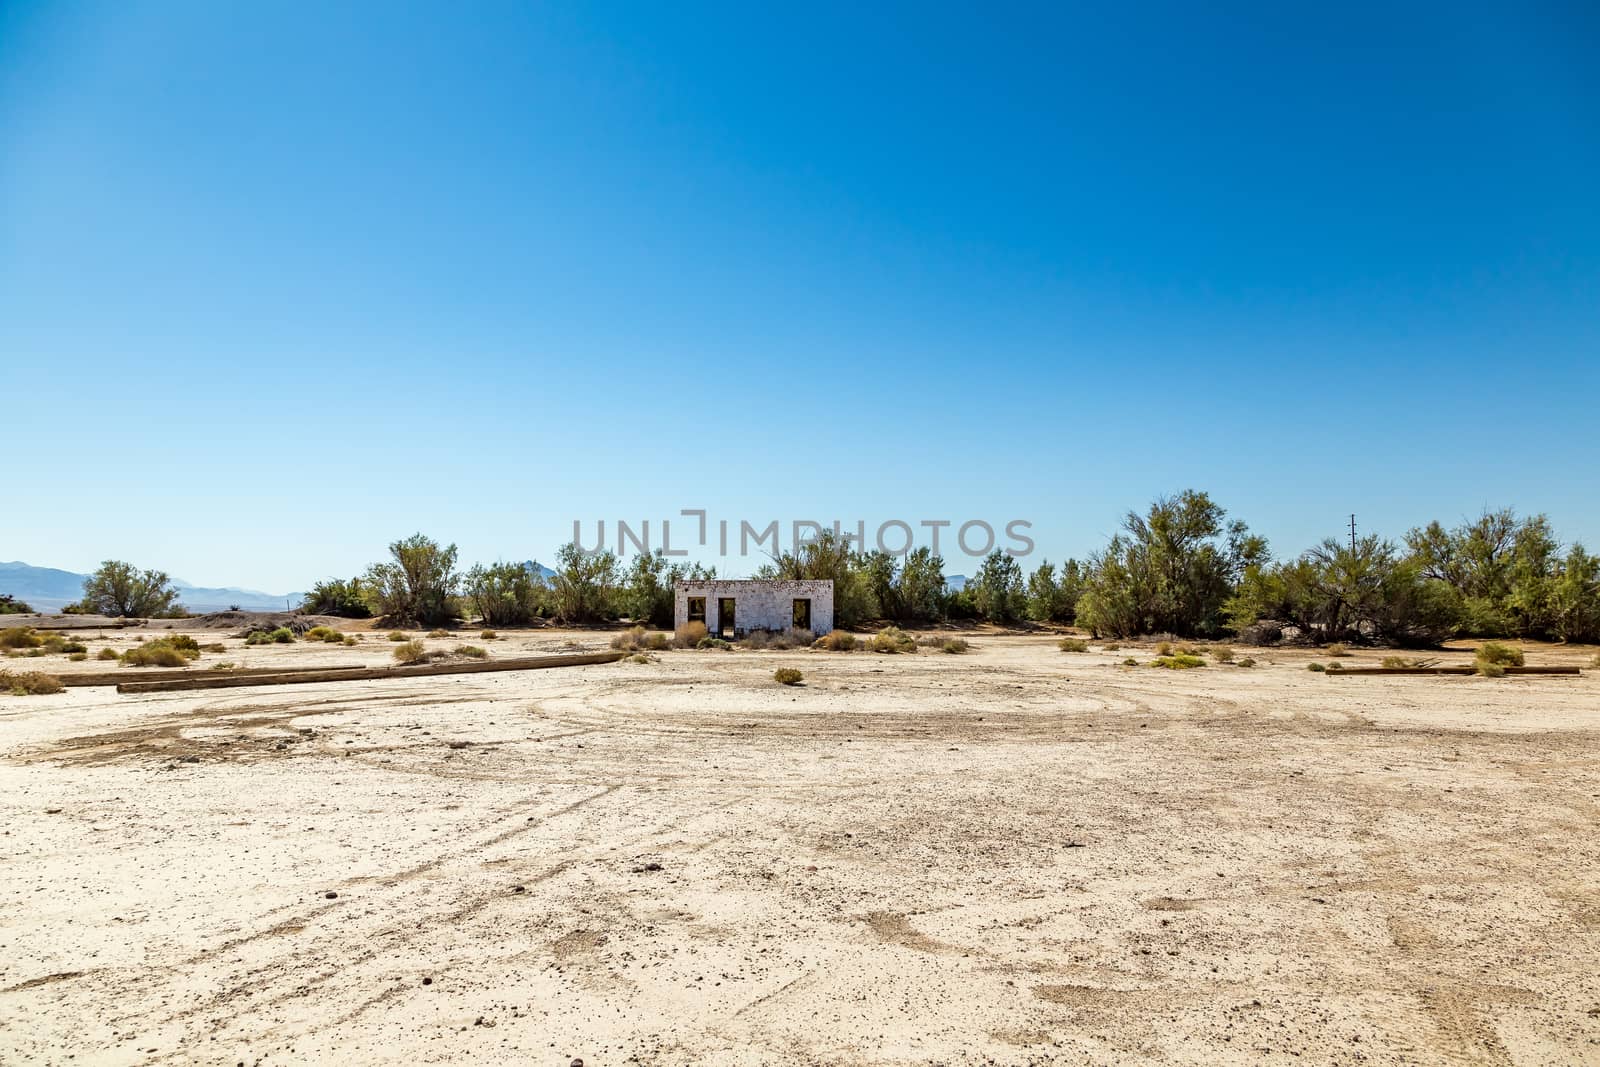 An abandoned building sits alongside the roadway near Death Valley Junction in the Funeral Mountains Wilderness Area, California.